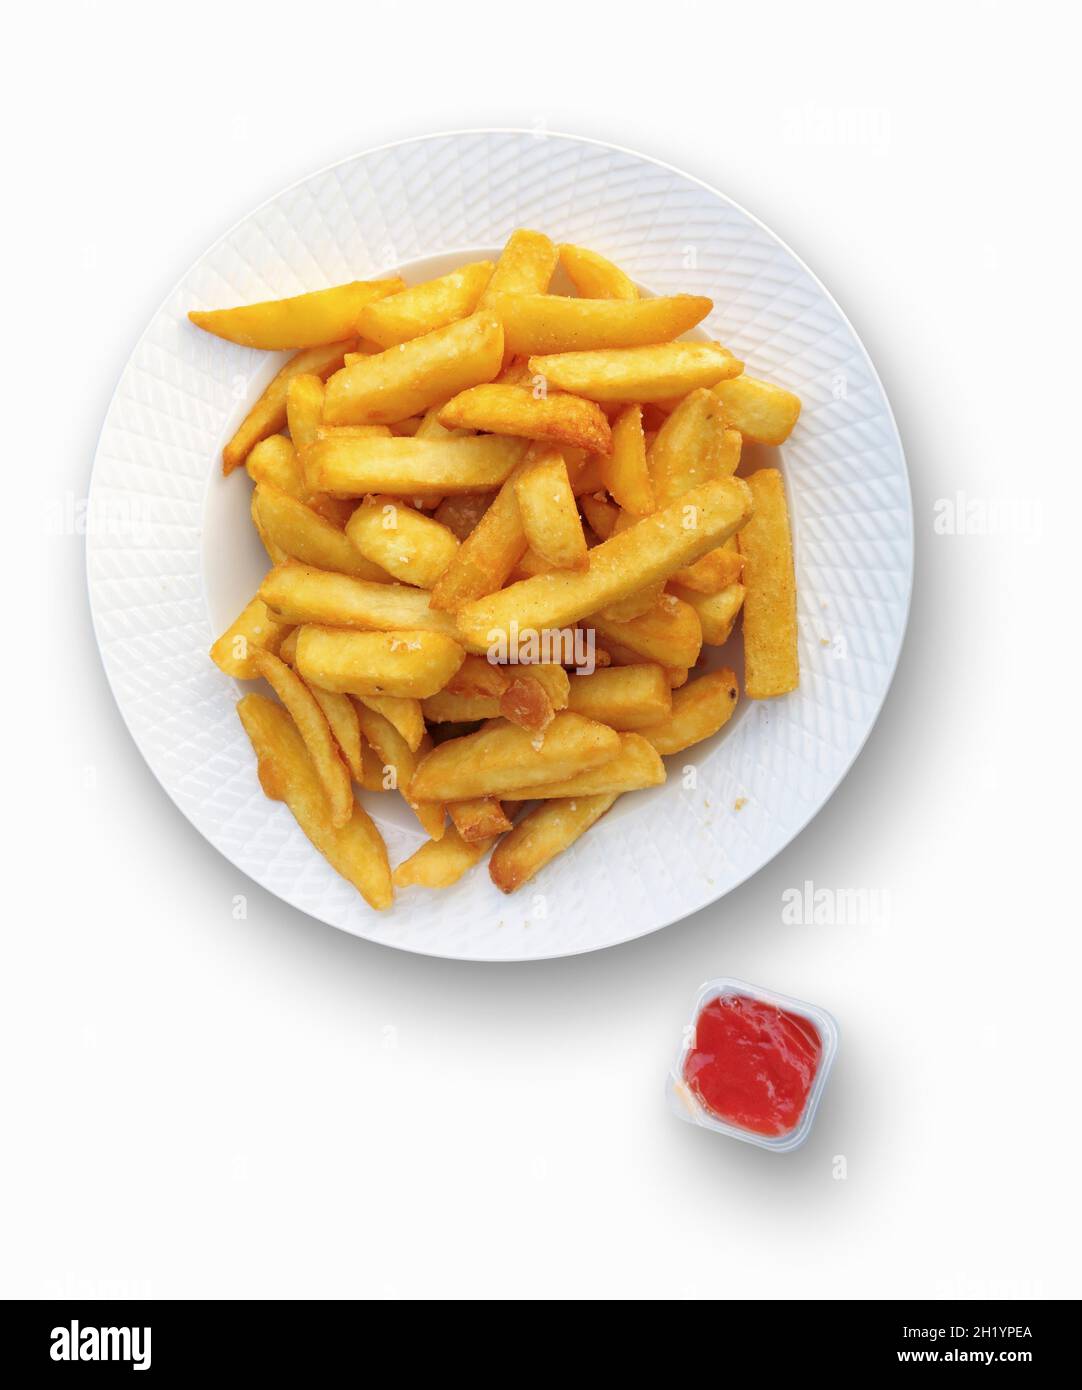 Ketchup on French fries, close-up, elevated view Stock Photo